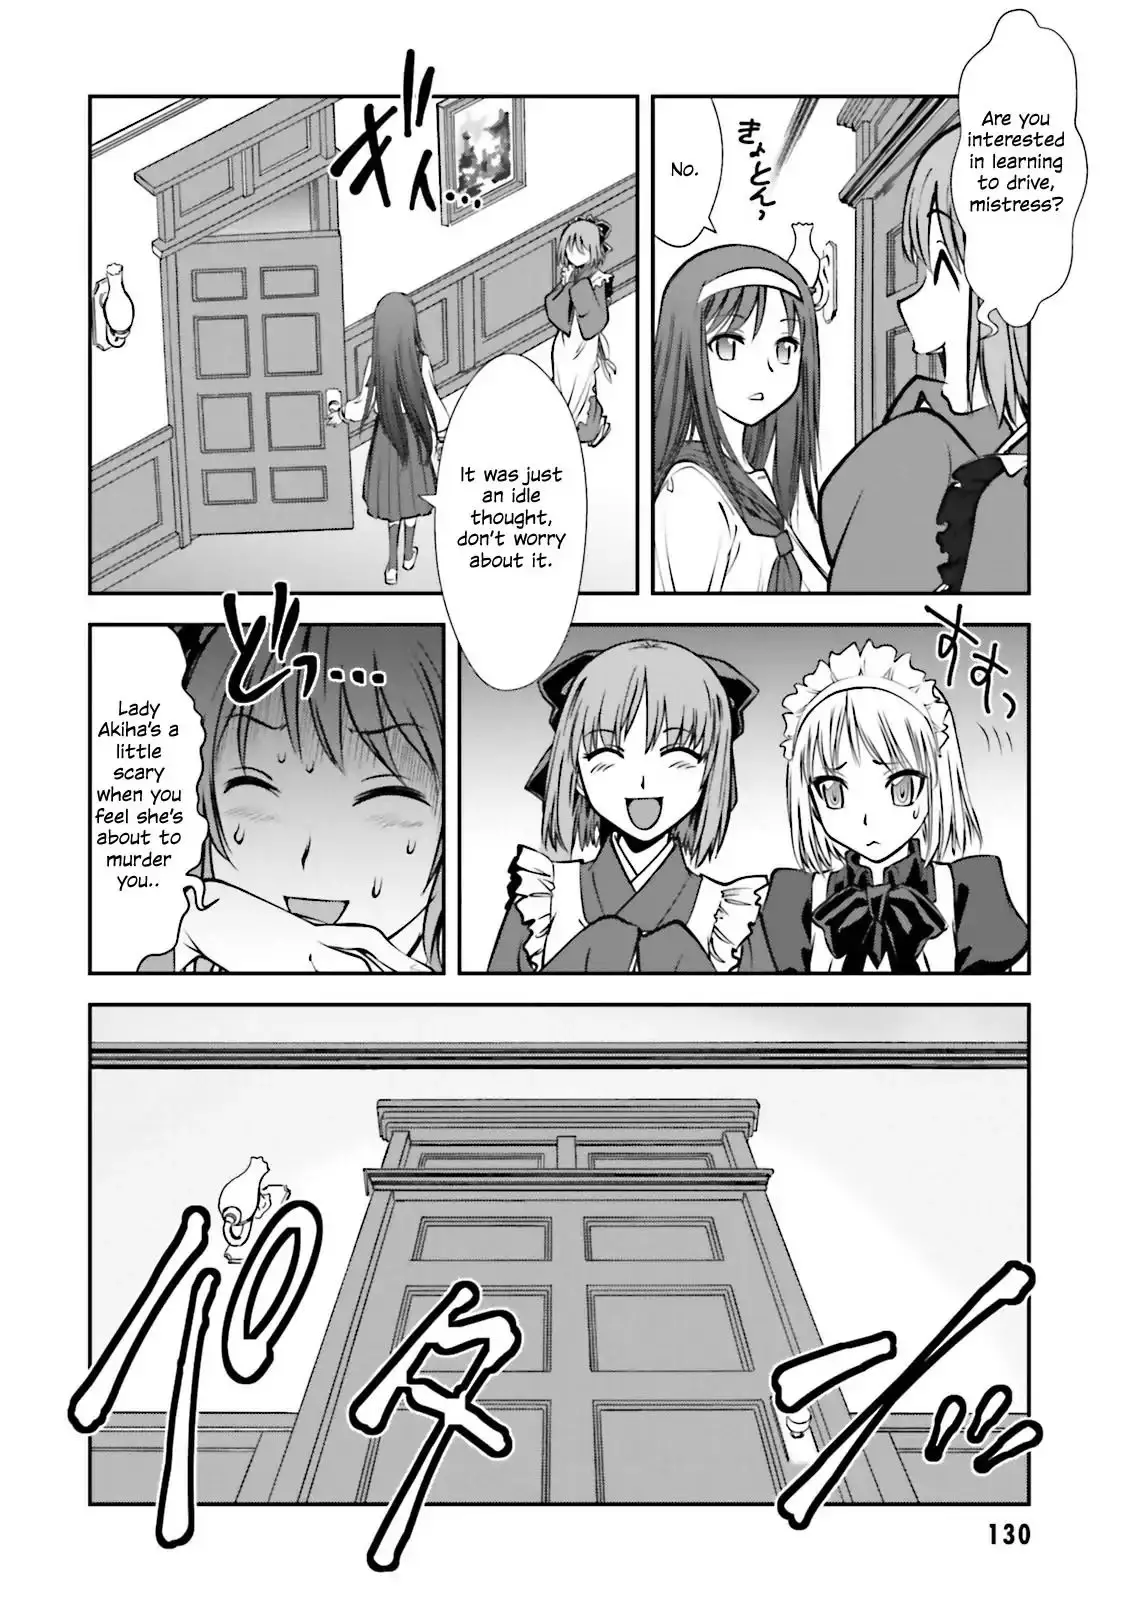 Melty Blood - Back Alley Alliance Nightmare - 4 page 4